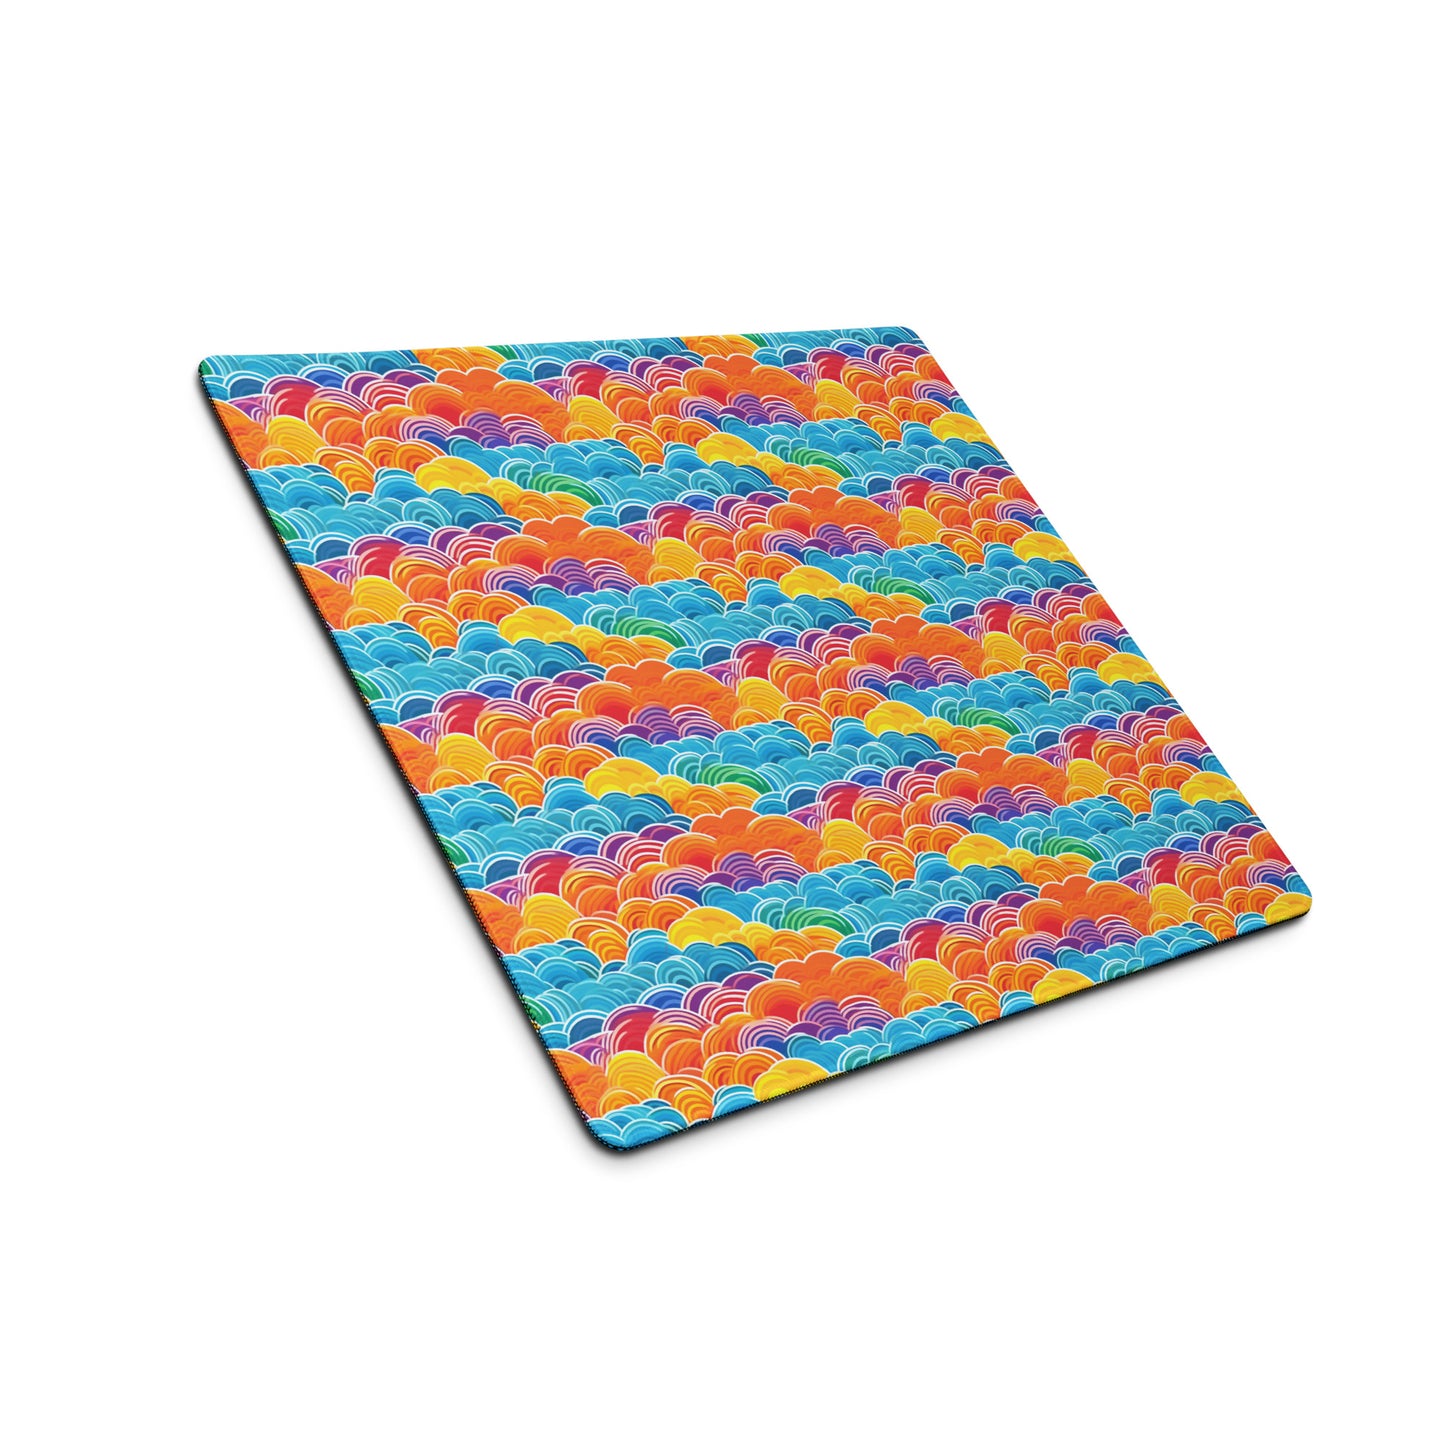 An 18" x 16" desk pad with bubbly swirly clouds all over it shown at an angle. Rainbow colored.